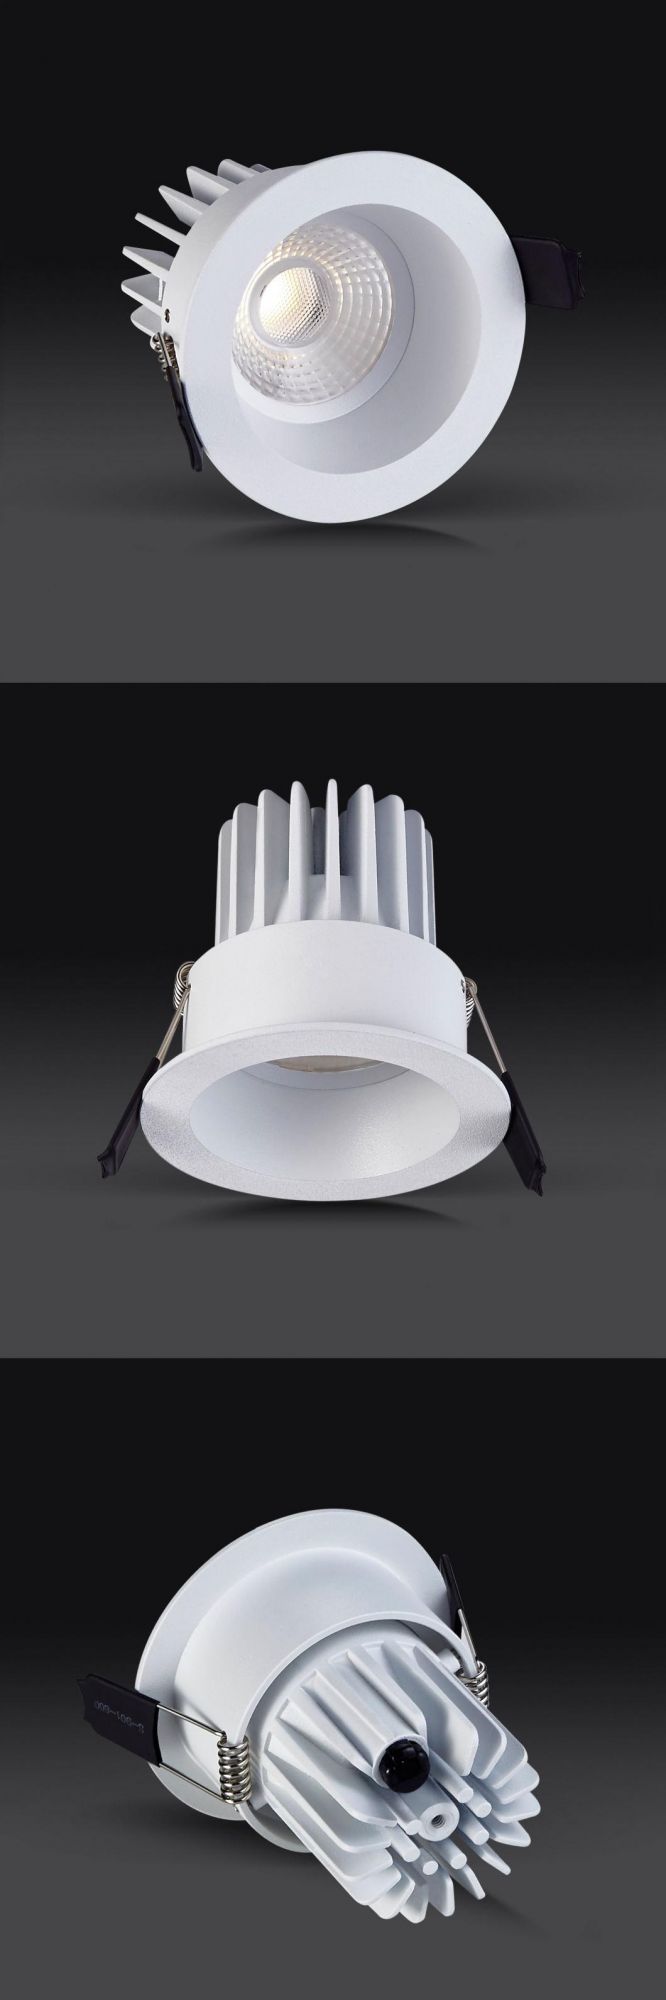 Venezina R6116 6W 8W with Ce and RoHS Approved 5 Years Warranty